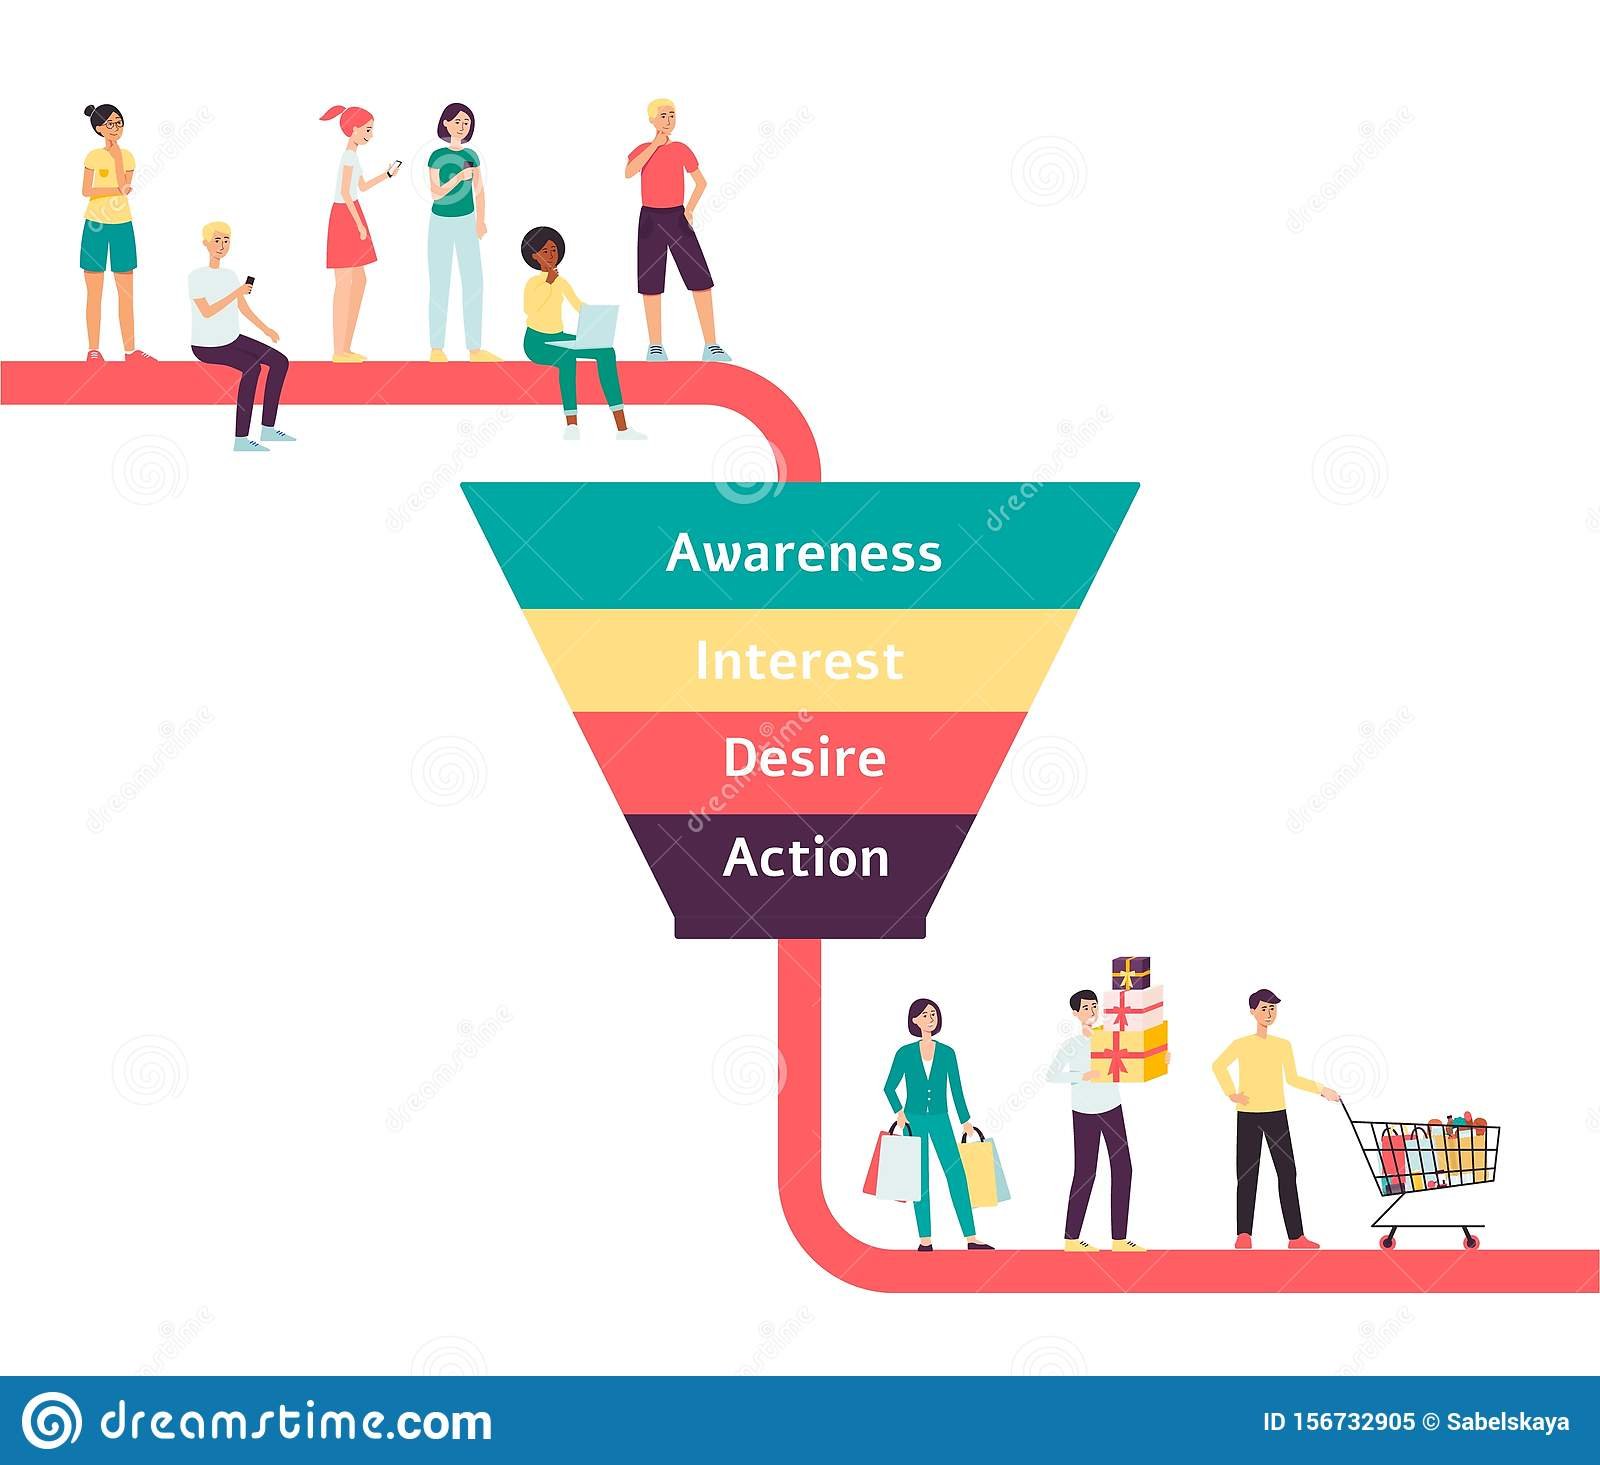 A simple example of a conversion funnel